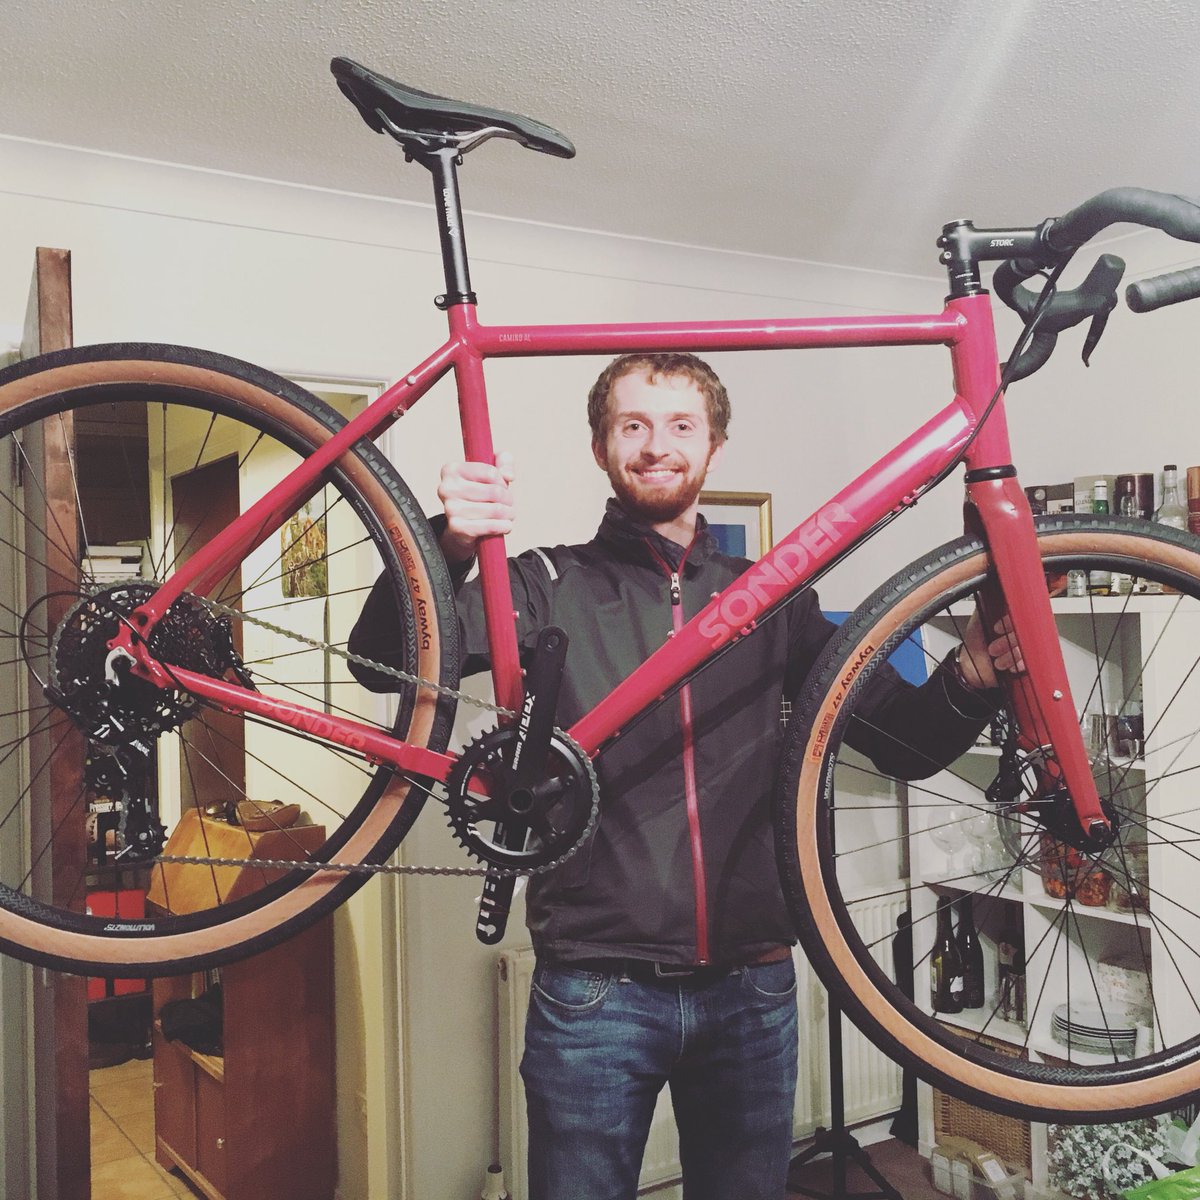 Can’t wait to get out on this tomorrow! #newbikeday thanks @Alpkit Love it. #goniceplacesdogoodthings #sondercamino